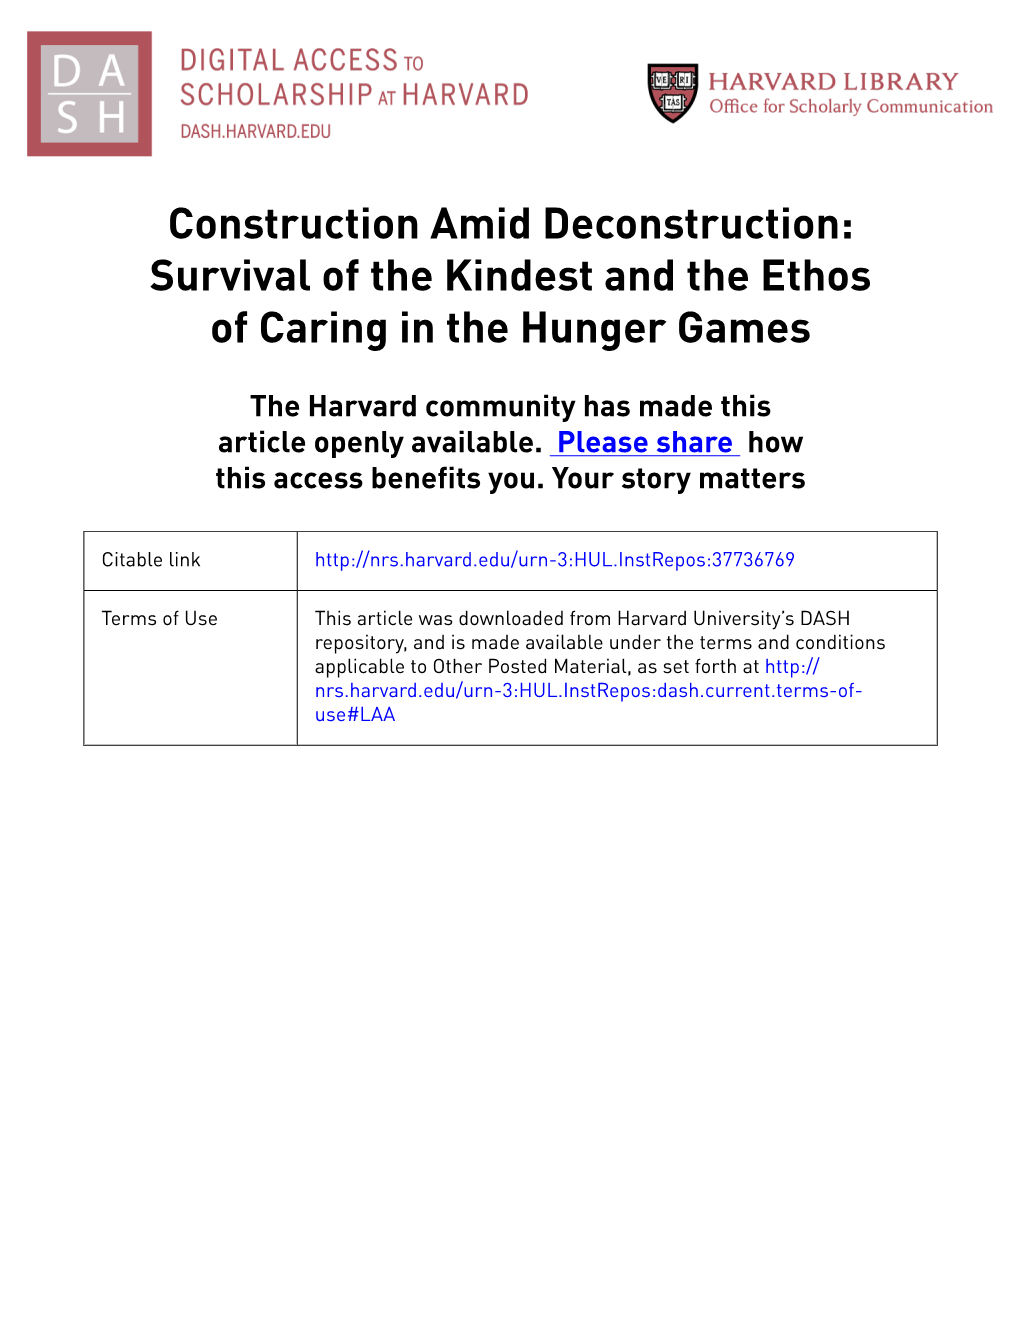 Construction Amid Deconstruction: Survival of the Kindest and the Ethos of Caring in the Hunger Games